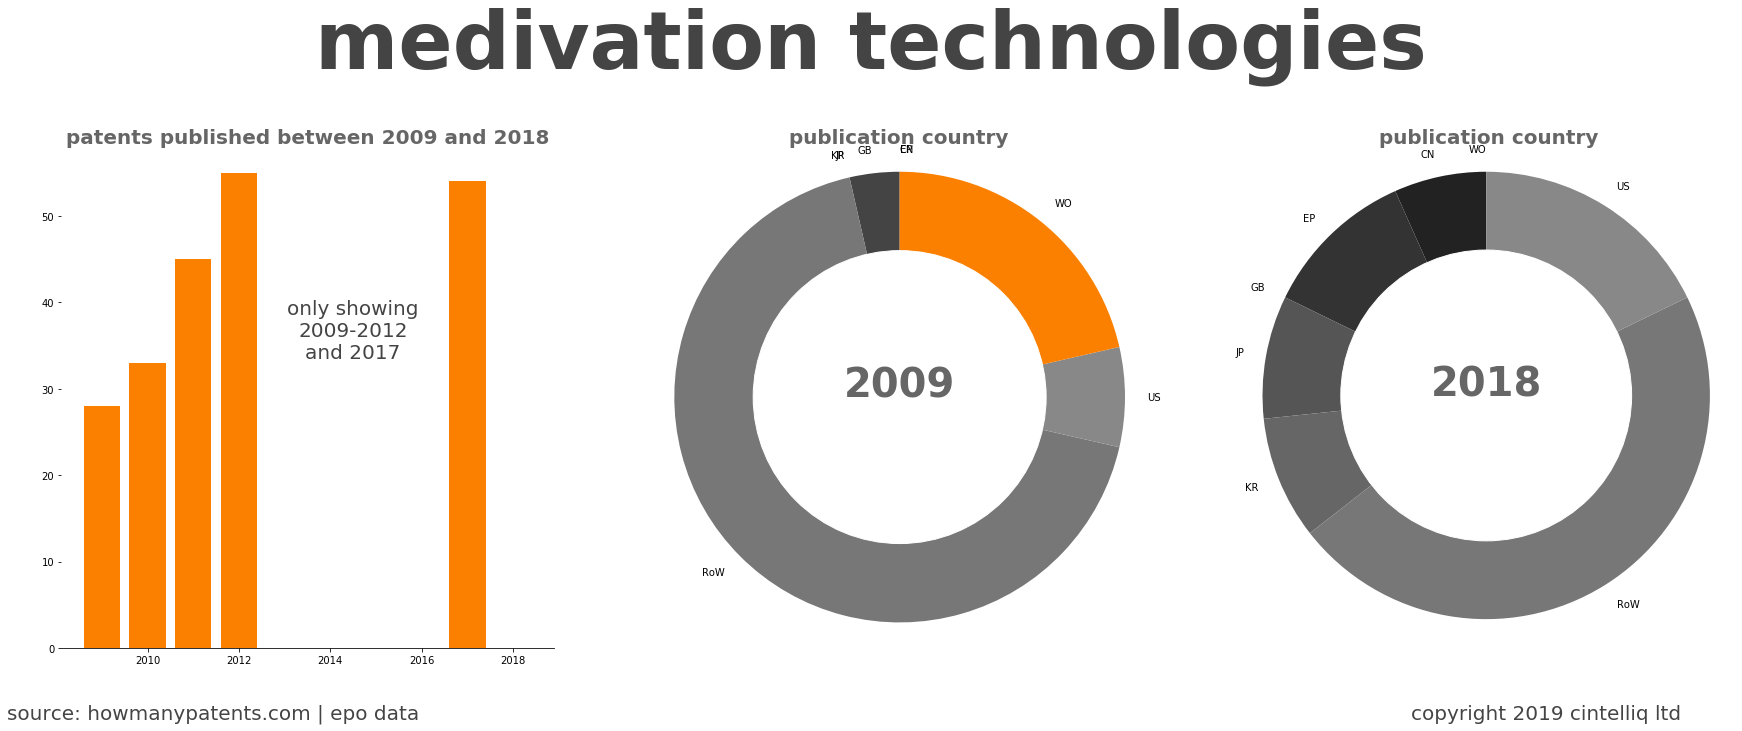 summary of patents for Medivation Technologies